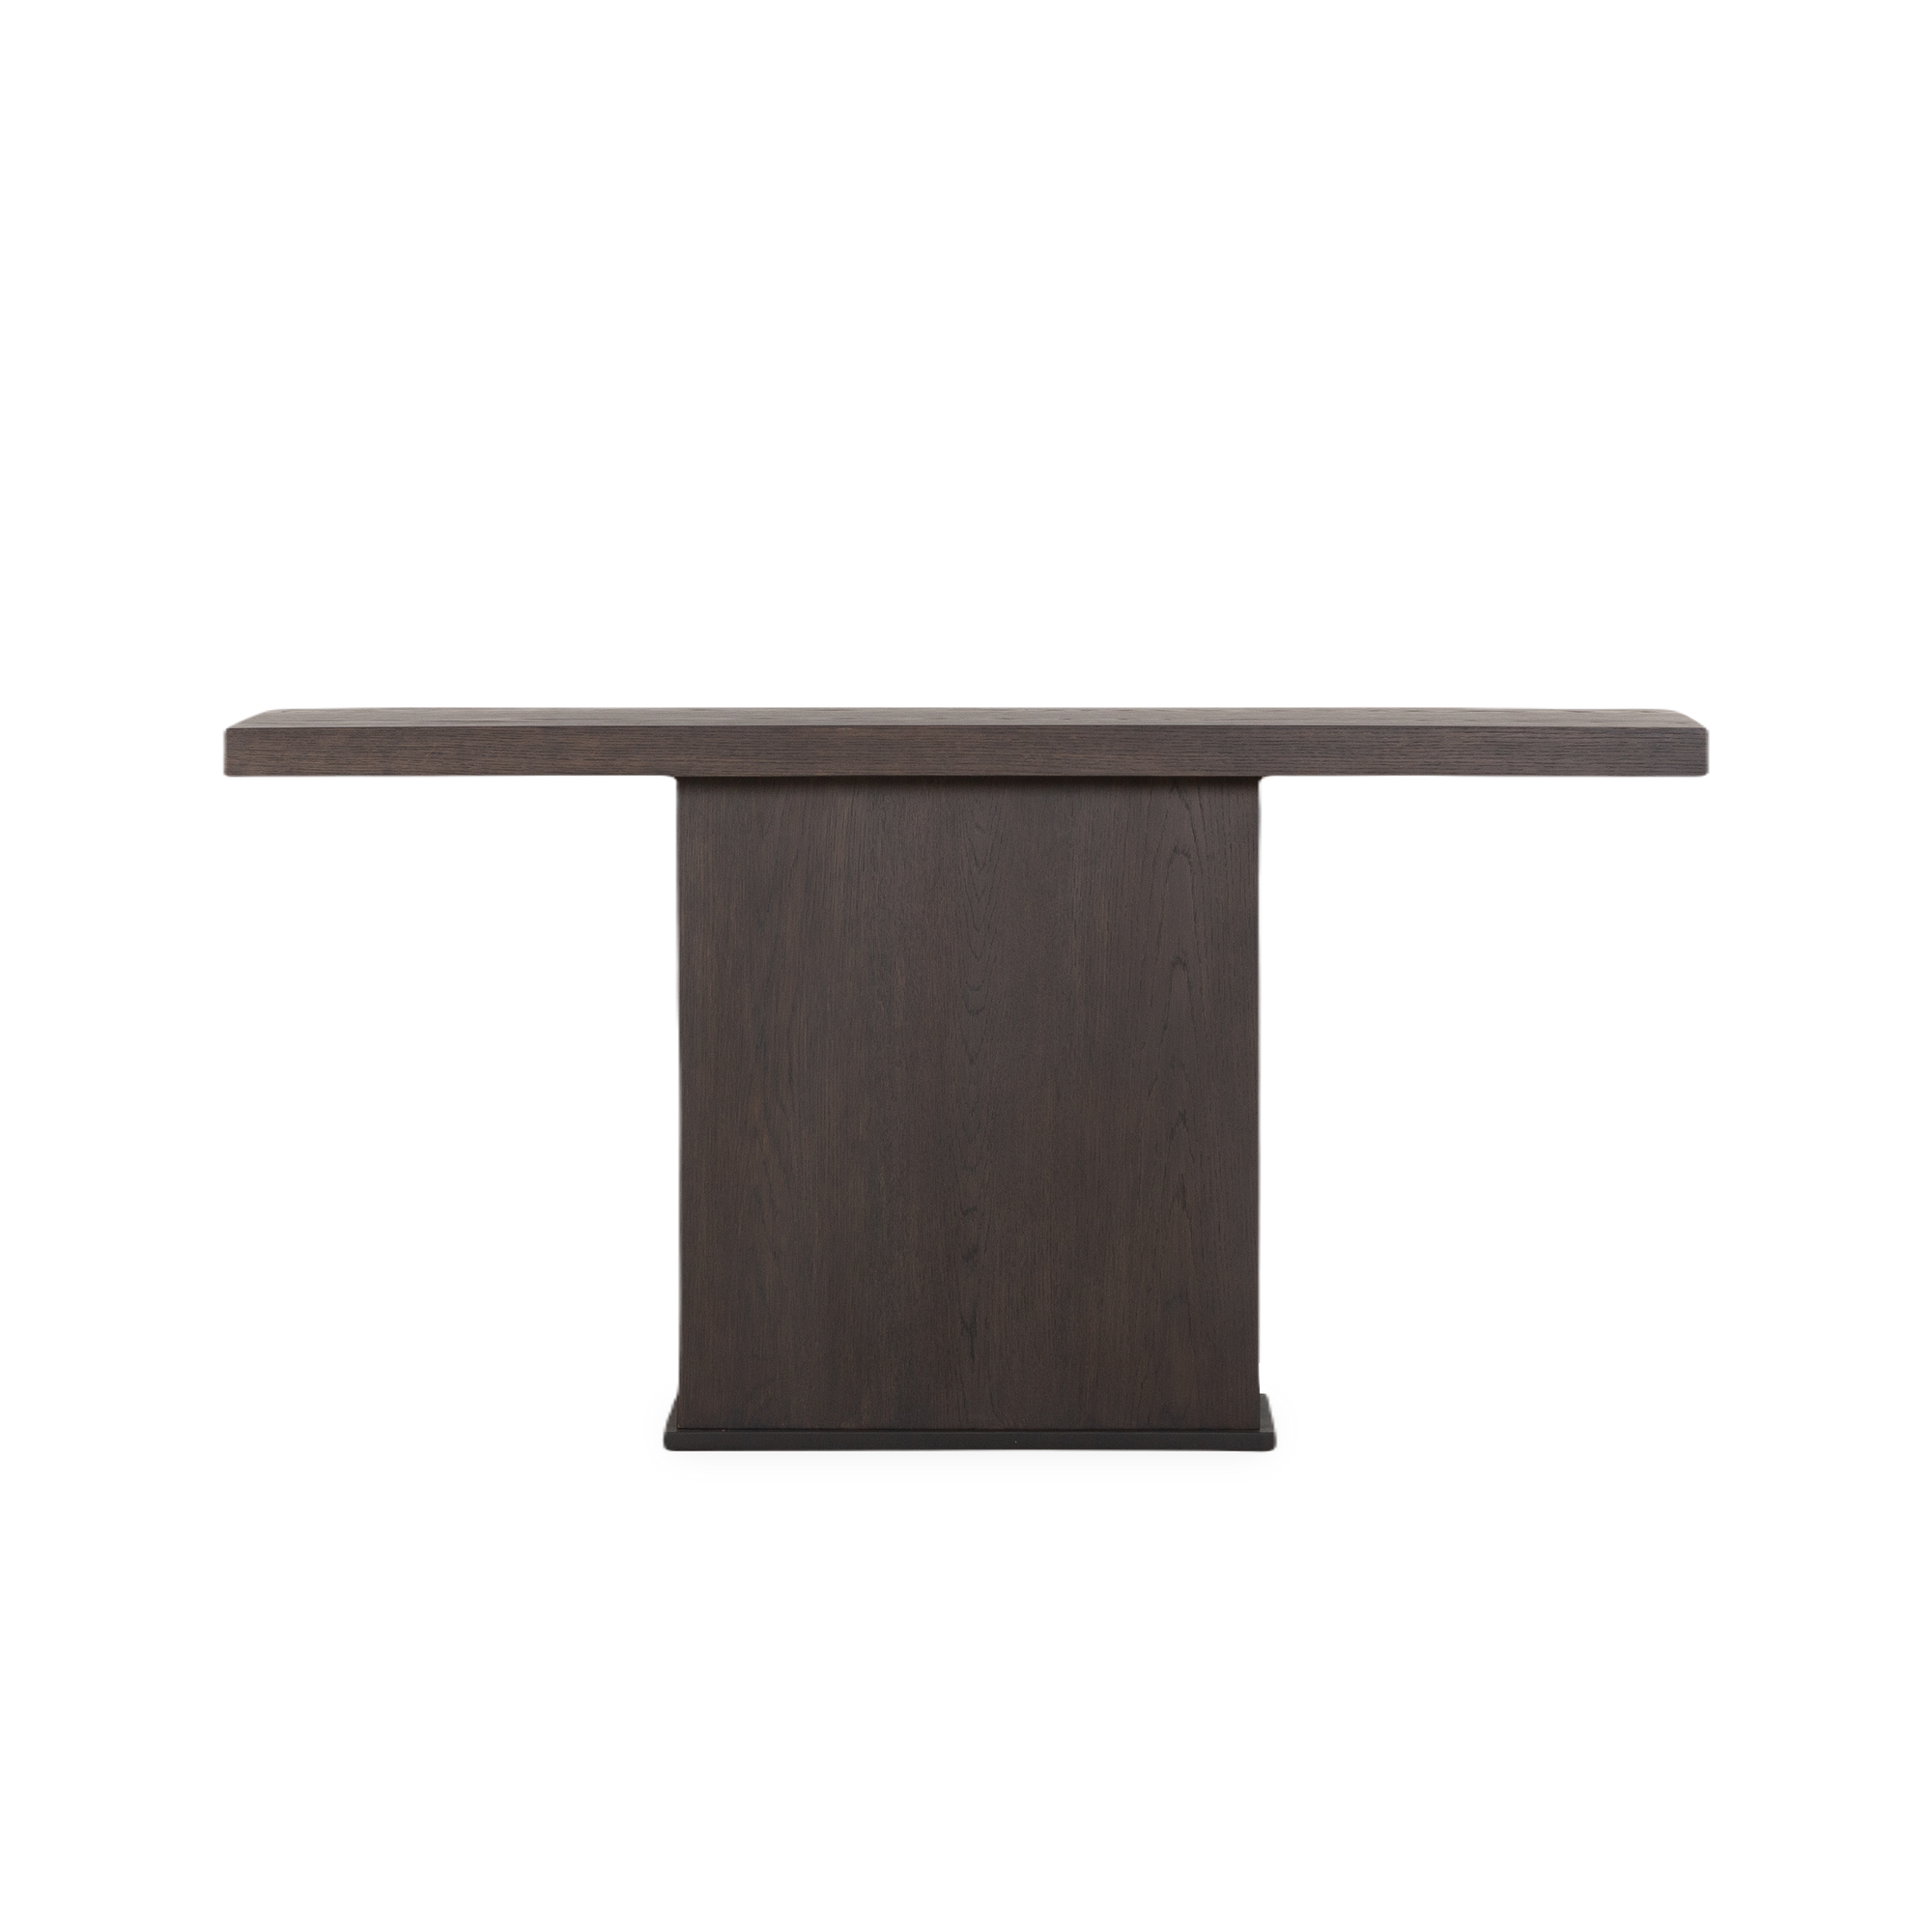 With bold, rectilinear lines and strong proportions, the Altar Console Table is a celebration of the timeless beauty of pure geometry.